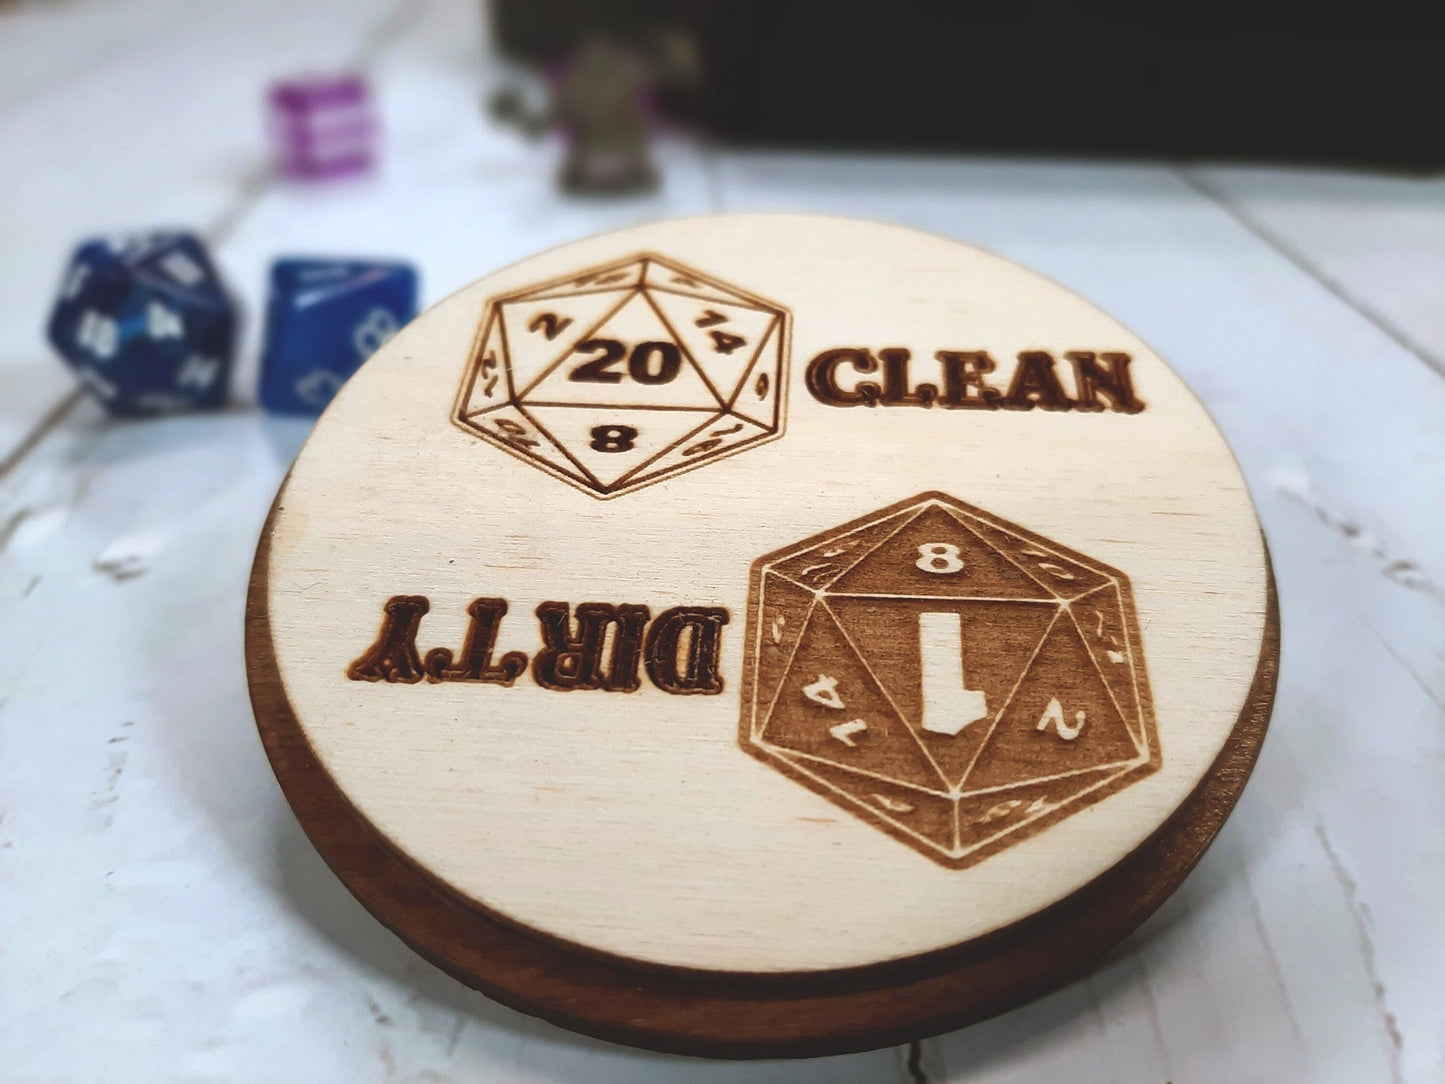 Dishwasher Dirty/Clean magnet indicator - D&D D20 role playing themed dish magnet